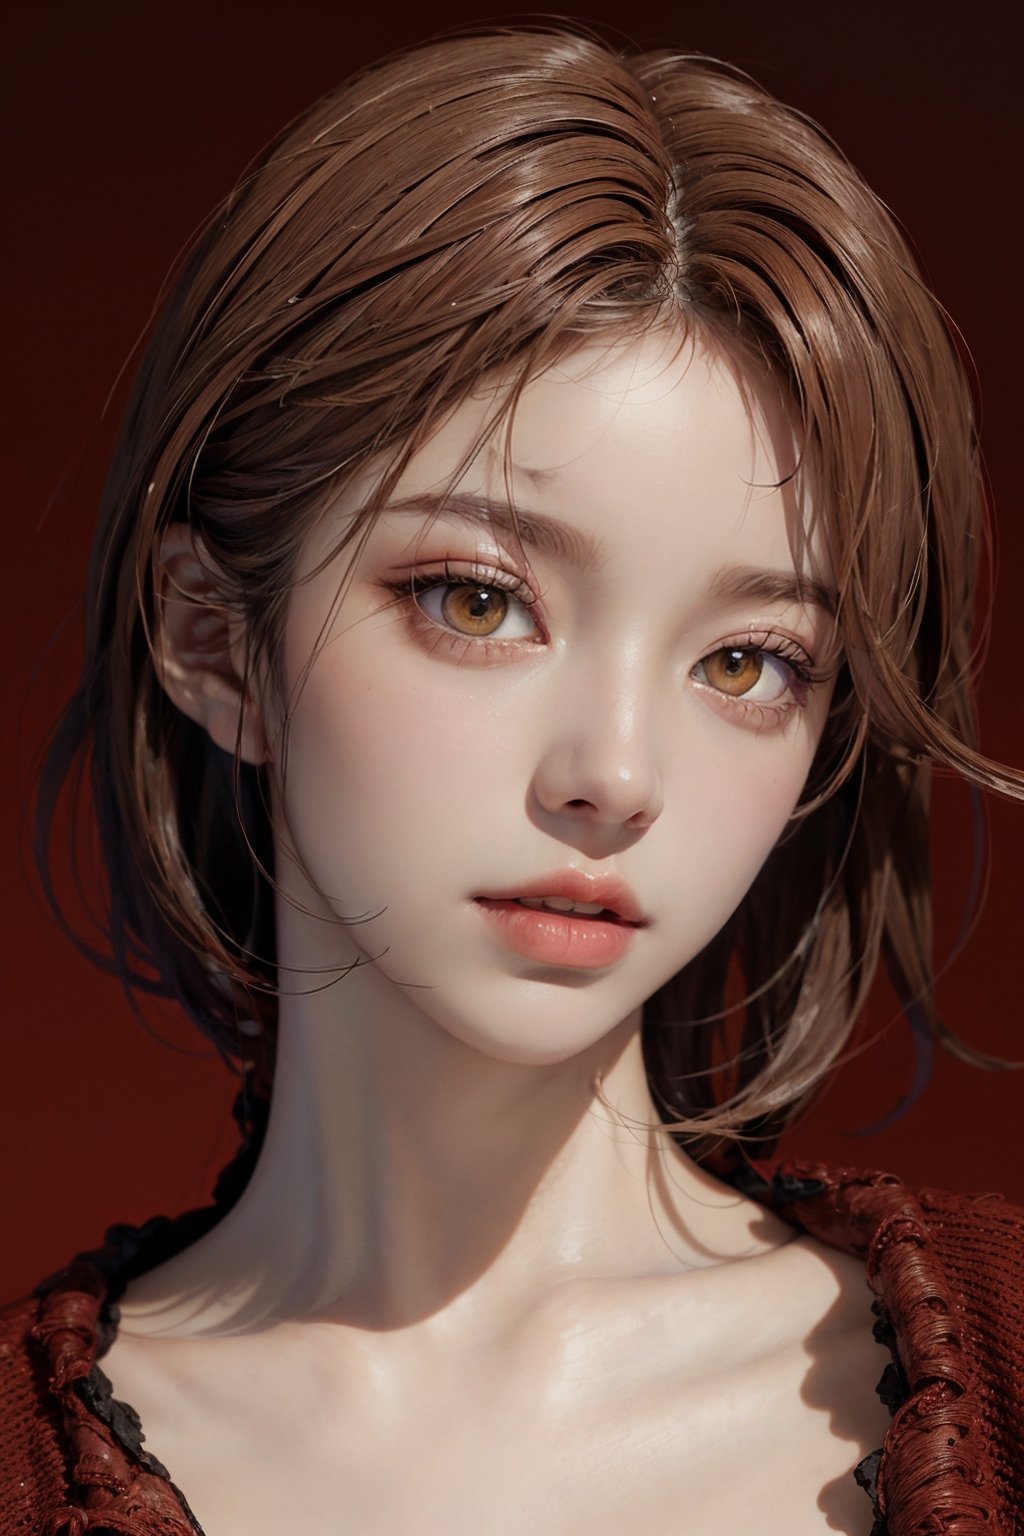 a 20 yo woman,long hair,dark theme, soothing tones, muted colors, high contrast, (natural skin texture, hyperrealism, soft light, sharp),red background,simple background, sad_face , red eyes
,zbxr,makima\(chainsaw man\) , redeyes, redeyes, red_hair, full_body,urban techwear,High detailed ,EpicSky , lip_bite, short-hair, shorthair , lip_biting , aheago, ahe_gao, ahegao_face, eye_rolling , tongue, sticking_out_tongue, sticking_tongue_out,
,Young beauty spirit ,ZGirl,Realism,koh_yunjung